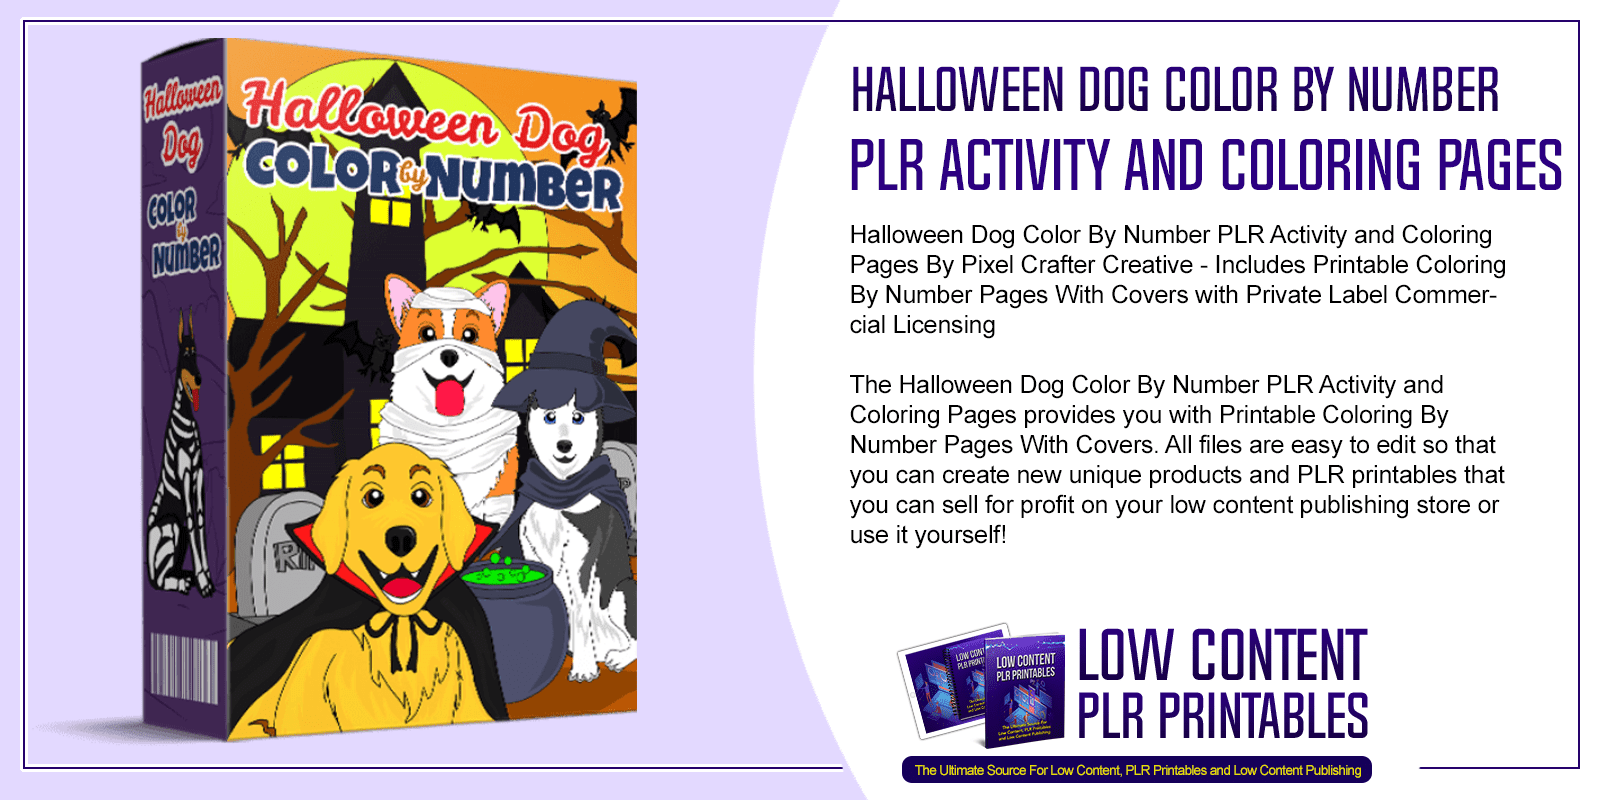 Halloween Dog Color By Number PLR Activity and Coloring Pages